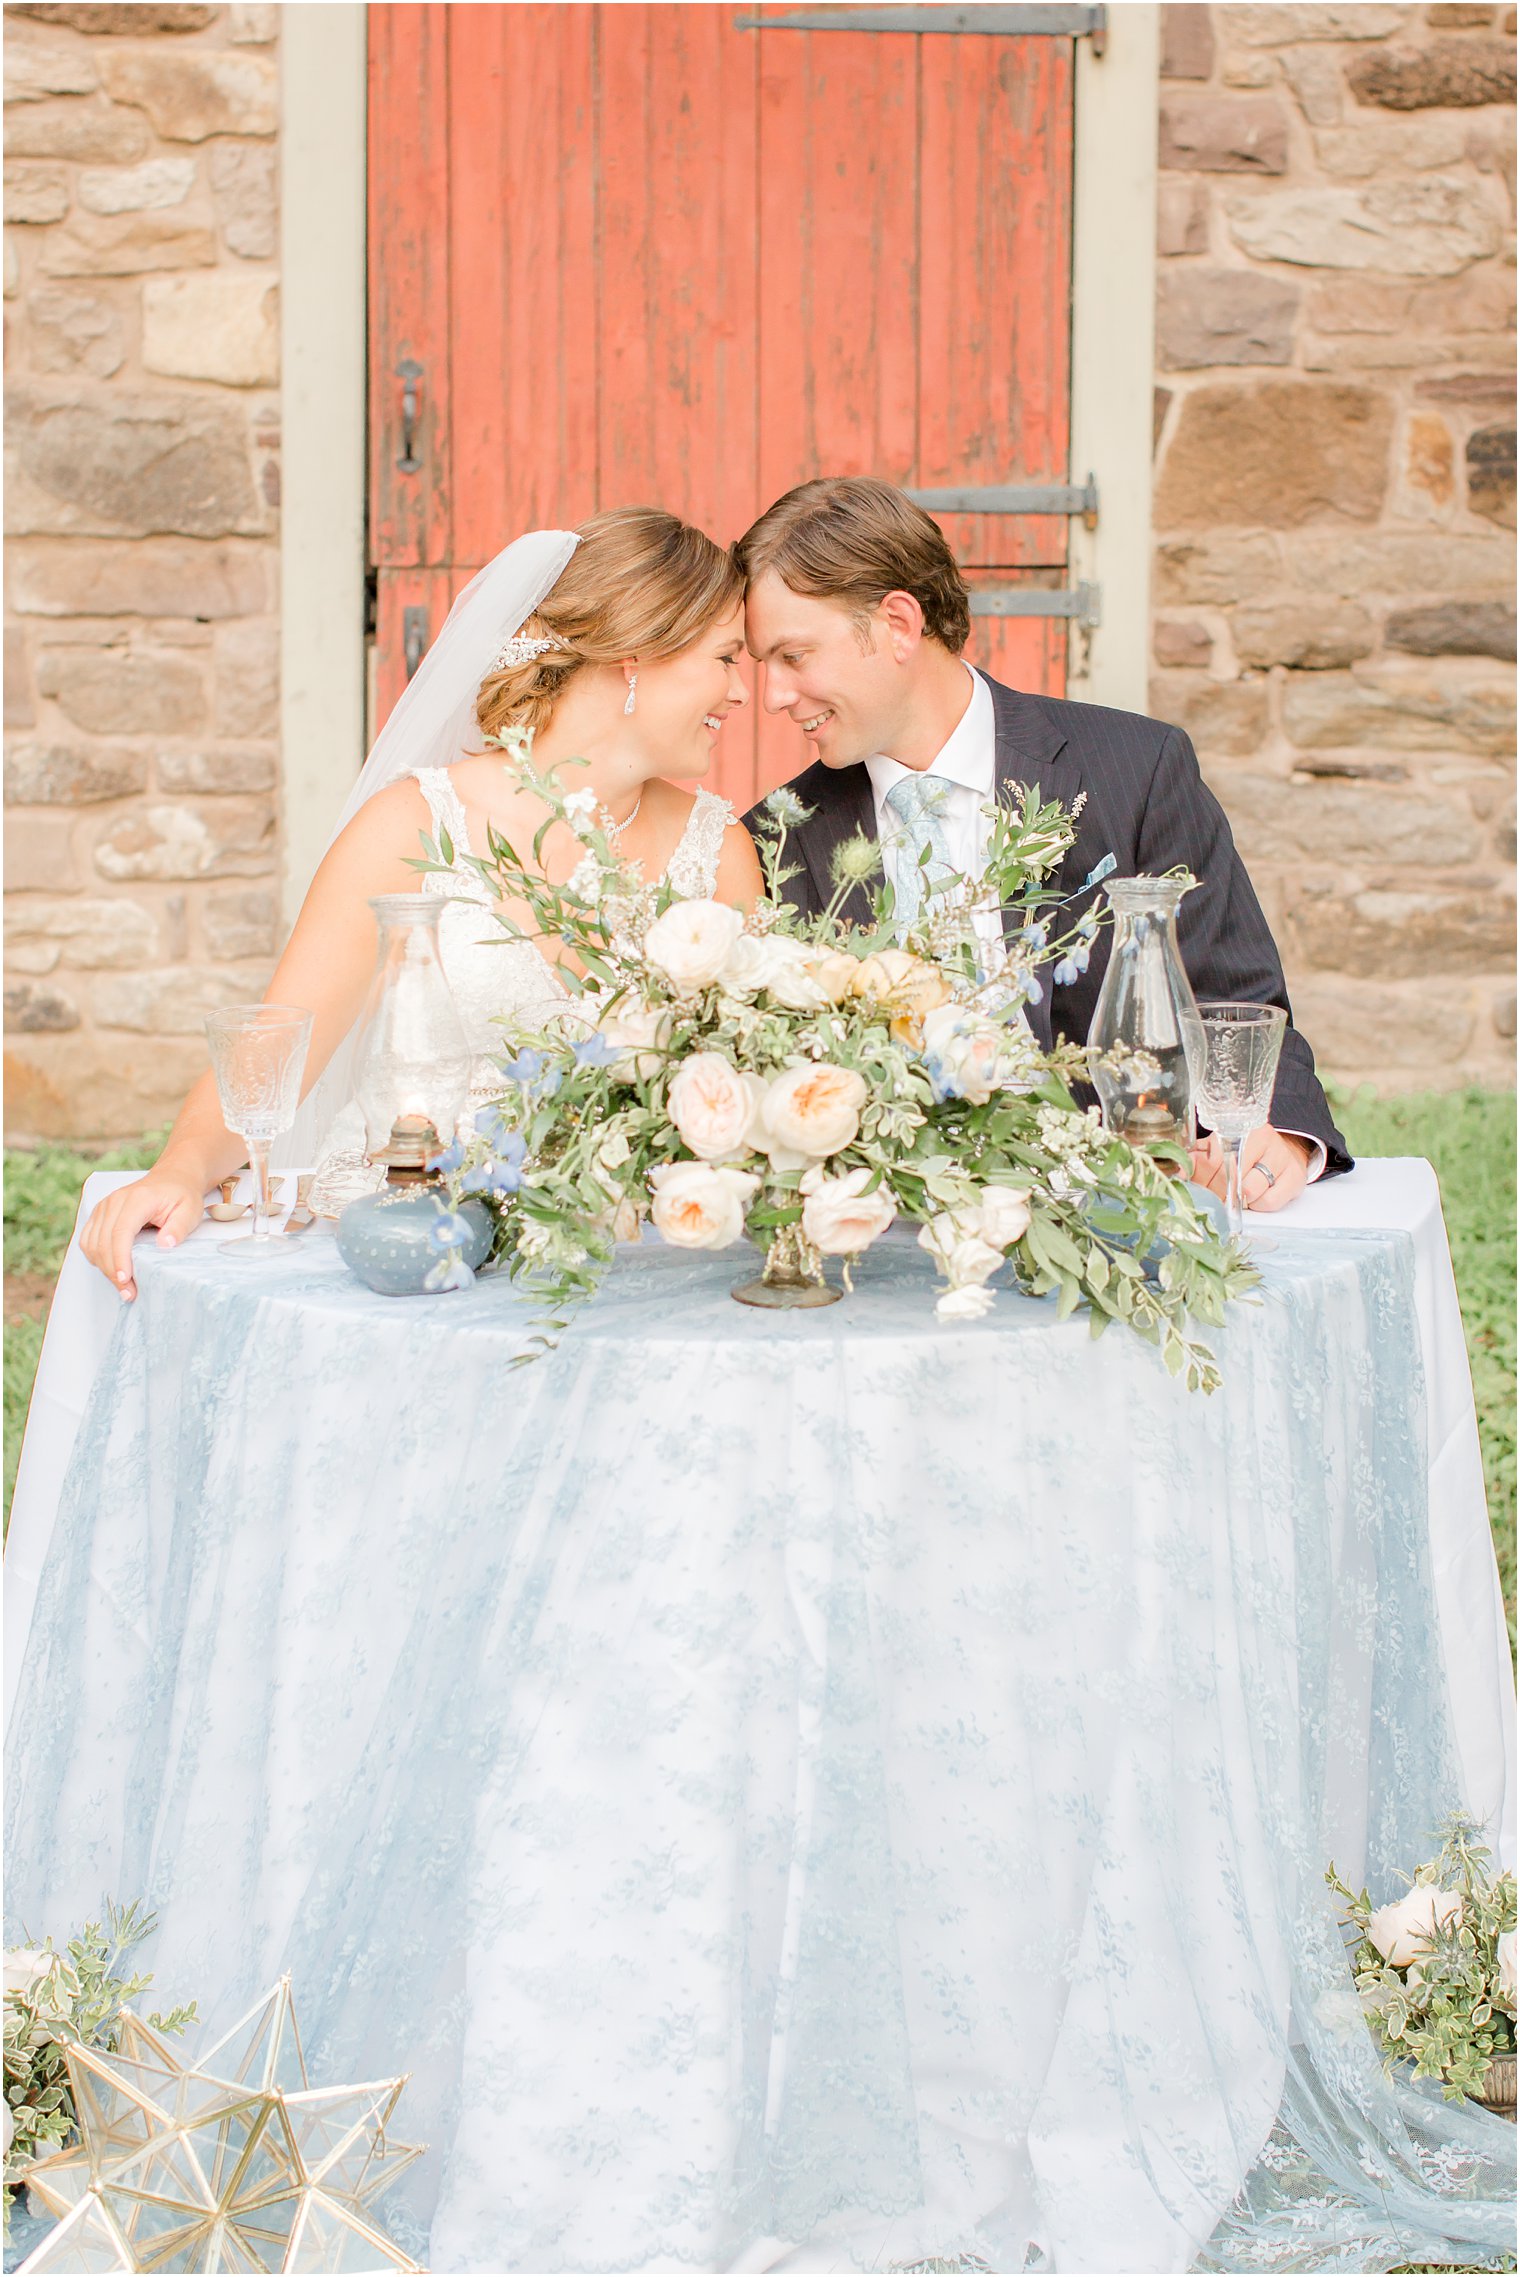 bride and groom at peach and dusty blue inspired sweetheart table photographed by Idalia Photography